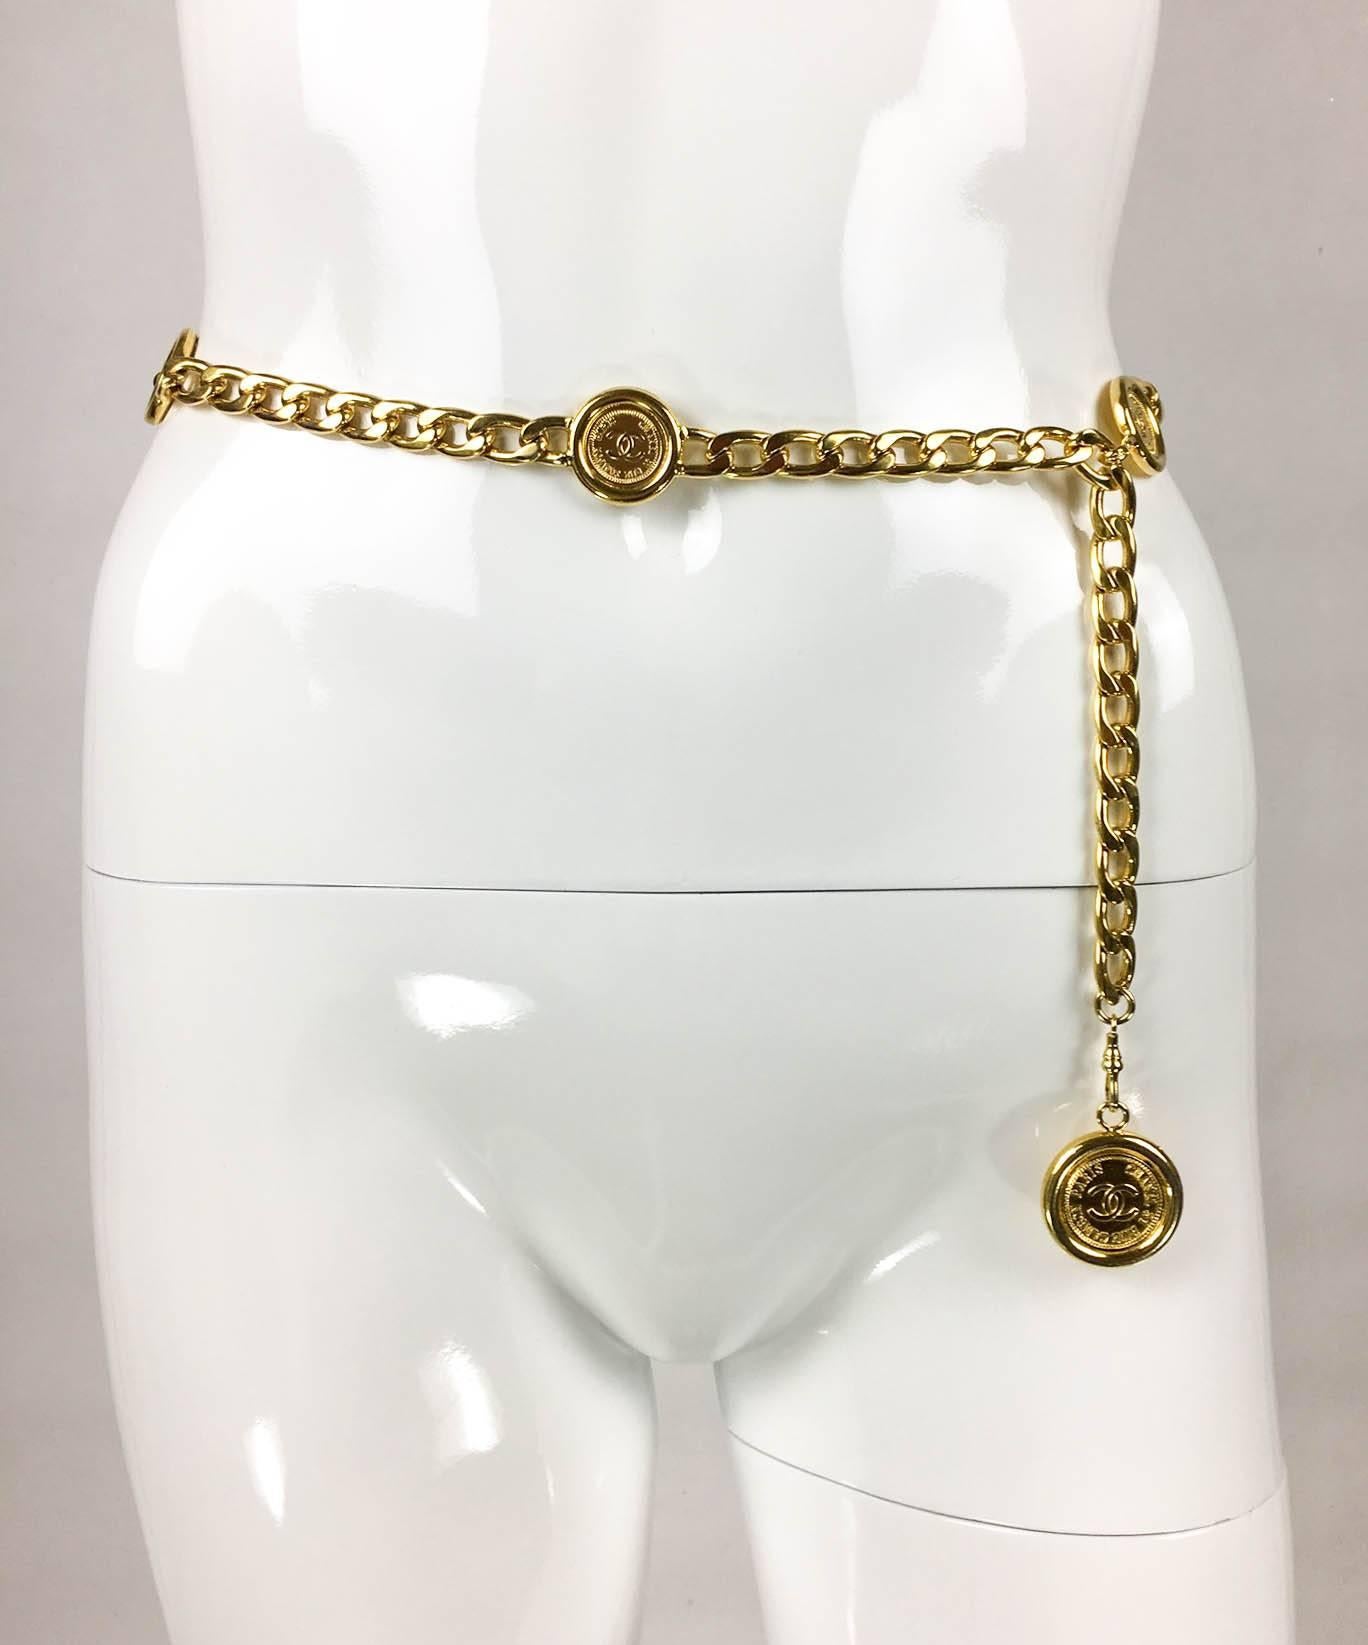 Chanel Gold-Tone Chain Medallion Pendant Belt / Necklace - 1990s In Excellent Condition In London, Chelsea